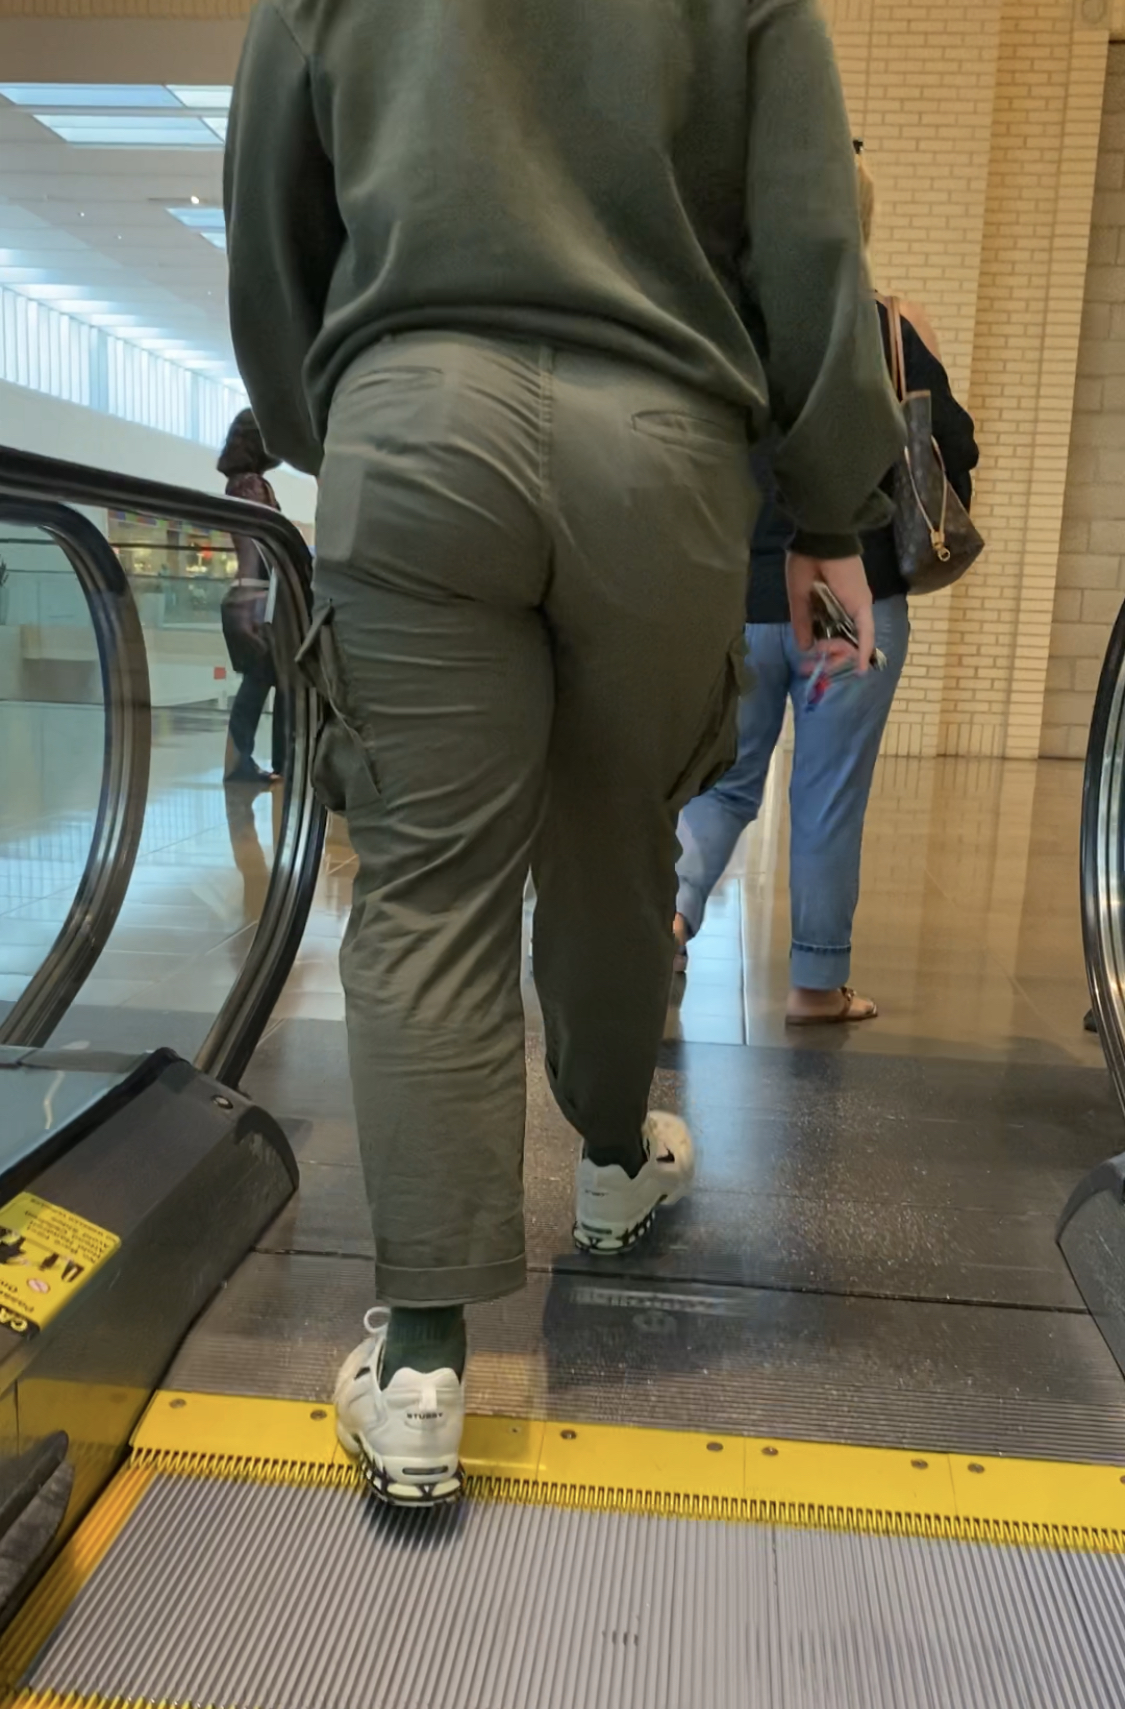 Super Beefy Guy Going Up The Escalator Then Strutting